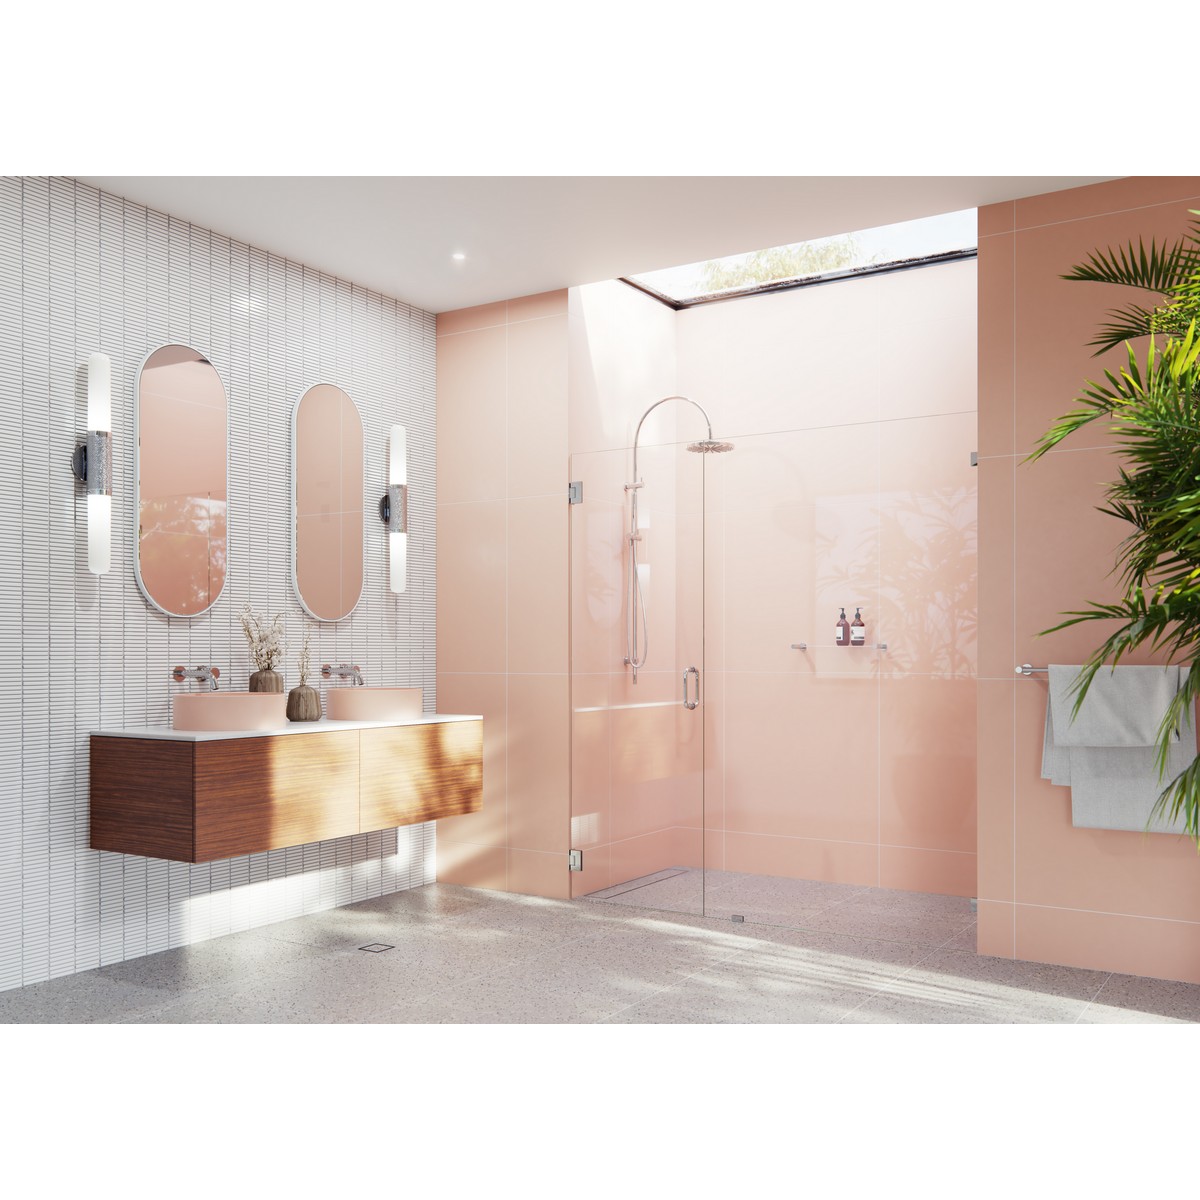 GLASS WAREHOUSE GW-WH-76.75 ILLUME 76 3/4 W X 78 H WALL HINGED FULLY FRAMELESS GLASS SHOWER ENCLOSURE